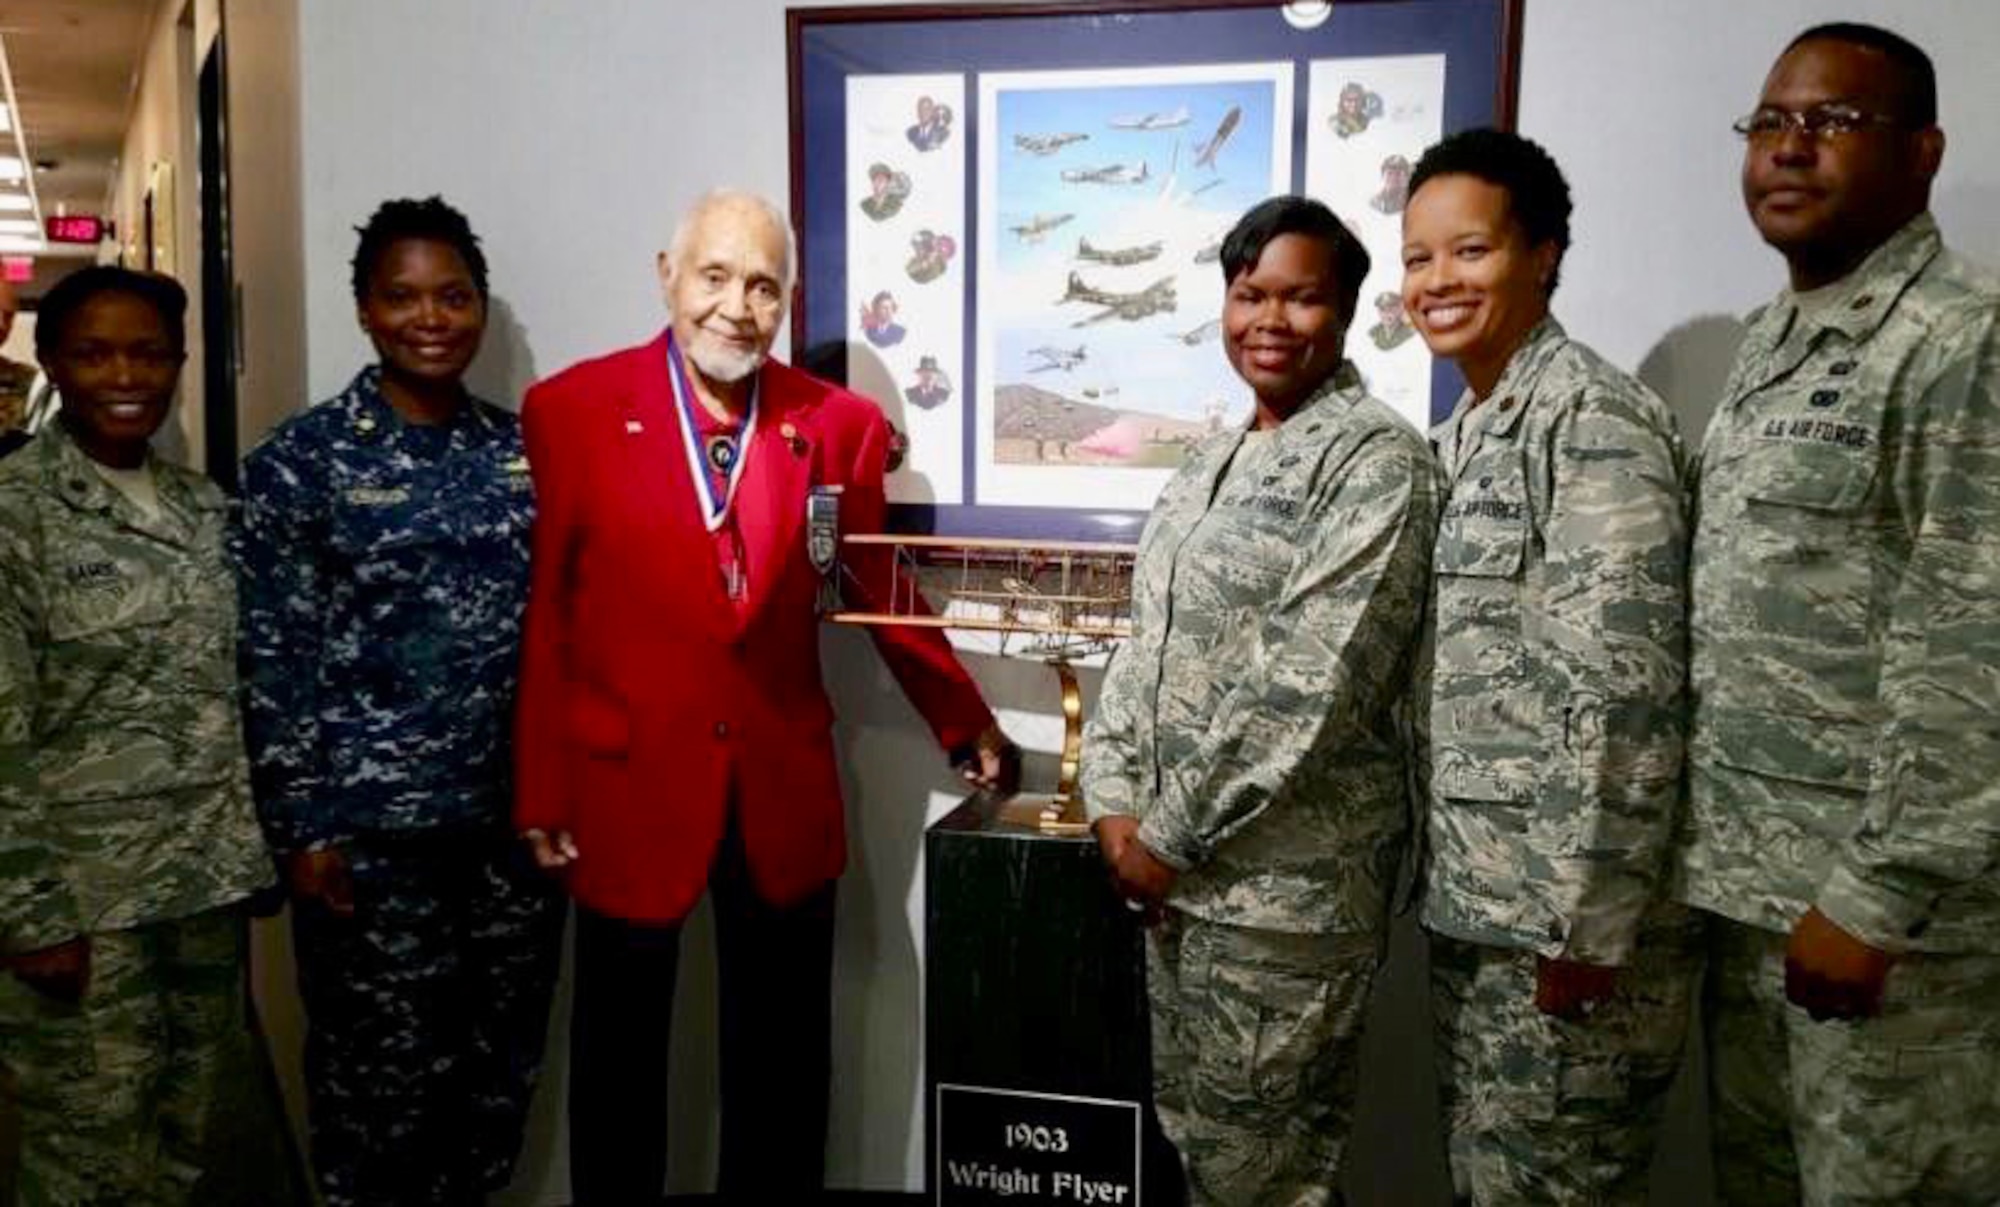 Retired U.S. Air Force Lt. Col. Leo Gray, third from left, poses for a photo with Maj. Natosha Reed, Air Command and Staff College student, third from right, and other military members during the ACSC’s 2016 Gathering of Eagles event, Maxwell Air Force Base, Alabama, May 31, 2016.